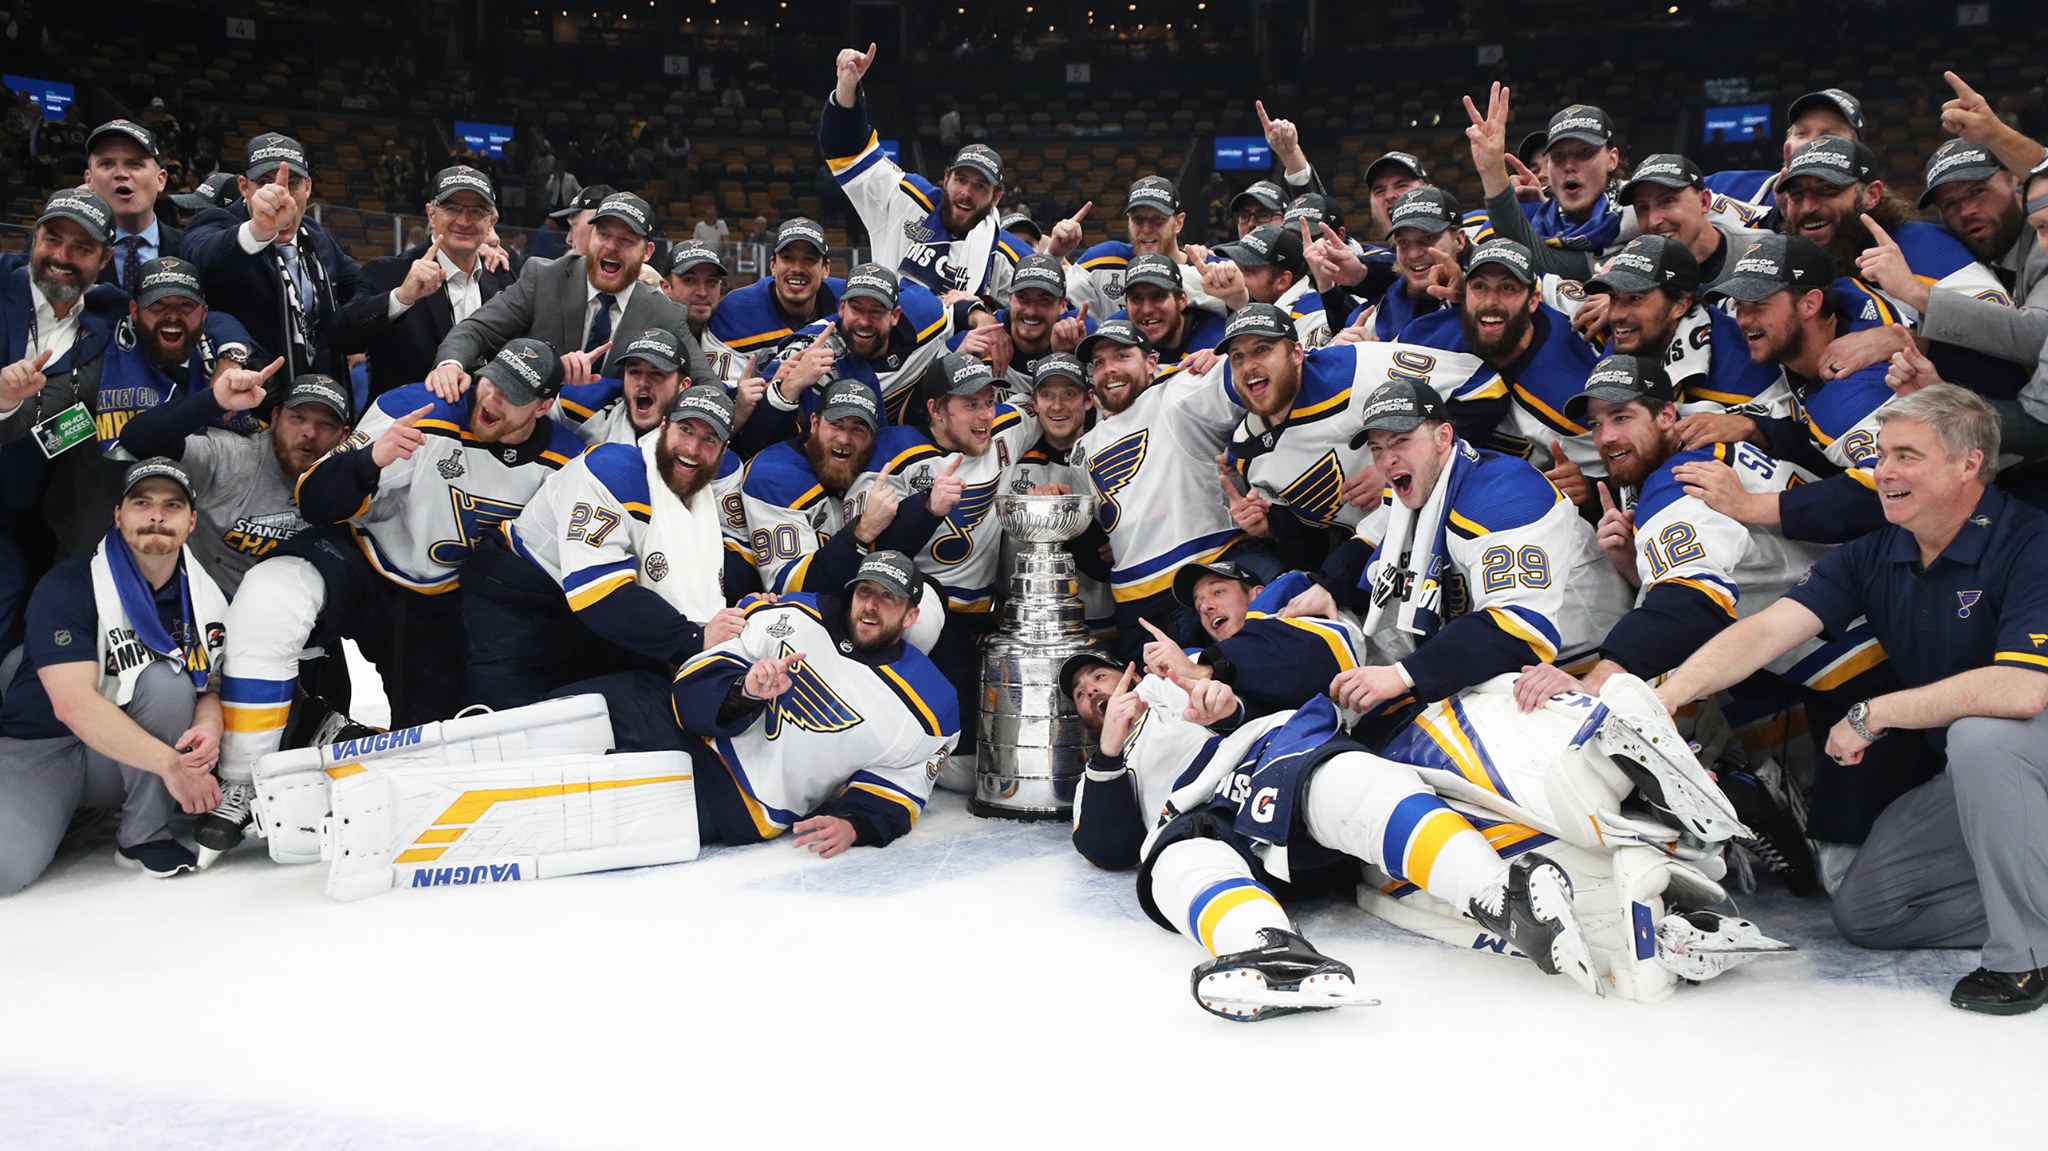 Play “Gloria” – The St. Louis Blues Are the 2019 Stanley Cup Champions | Review St. Louis